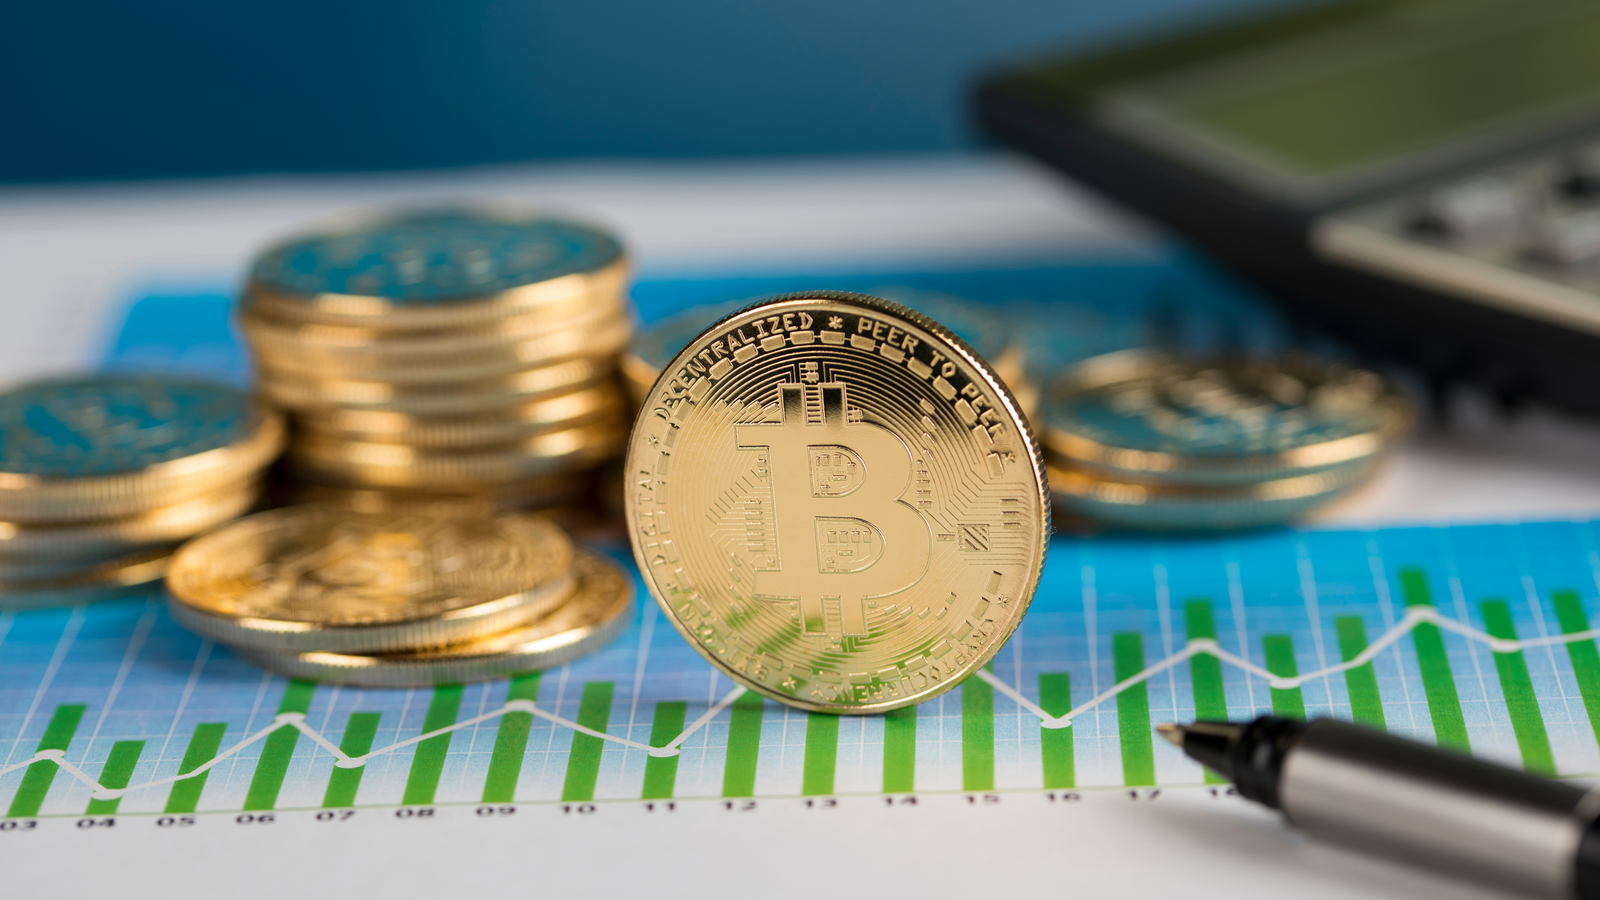 An image of a Bitcoin token standing upright on a rising graph, a calculator and pen in the background; crypto coins